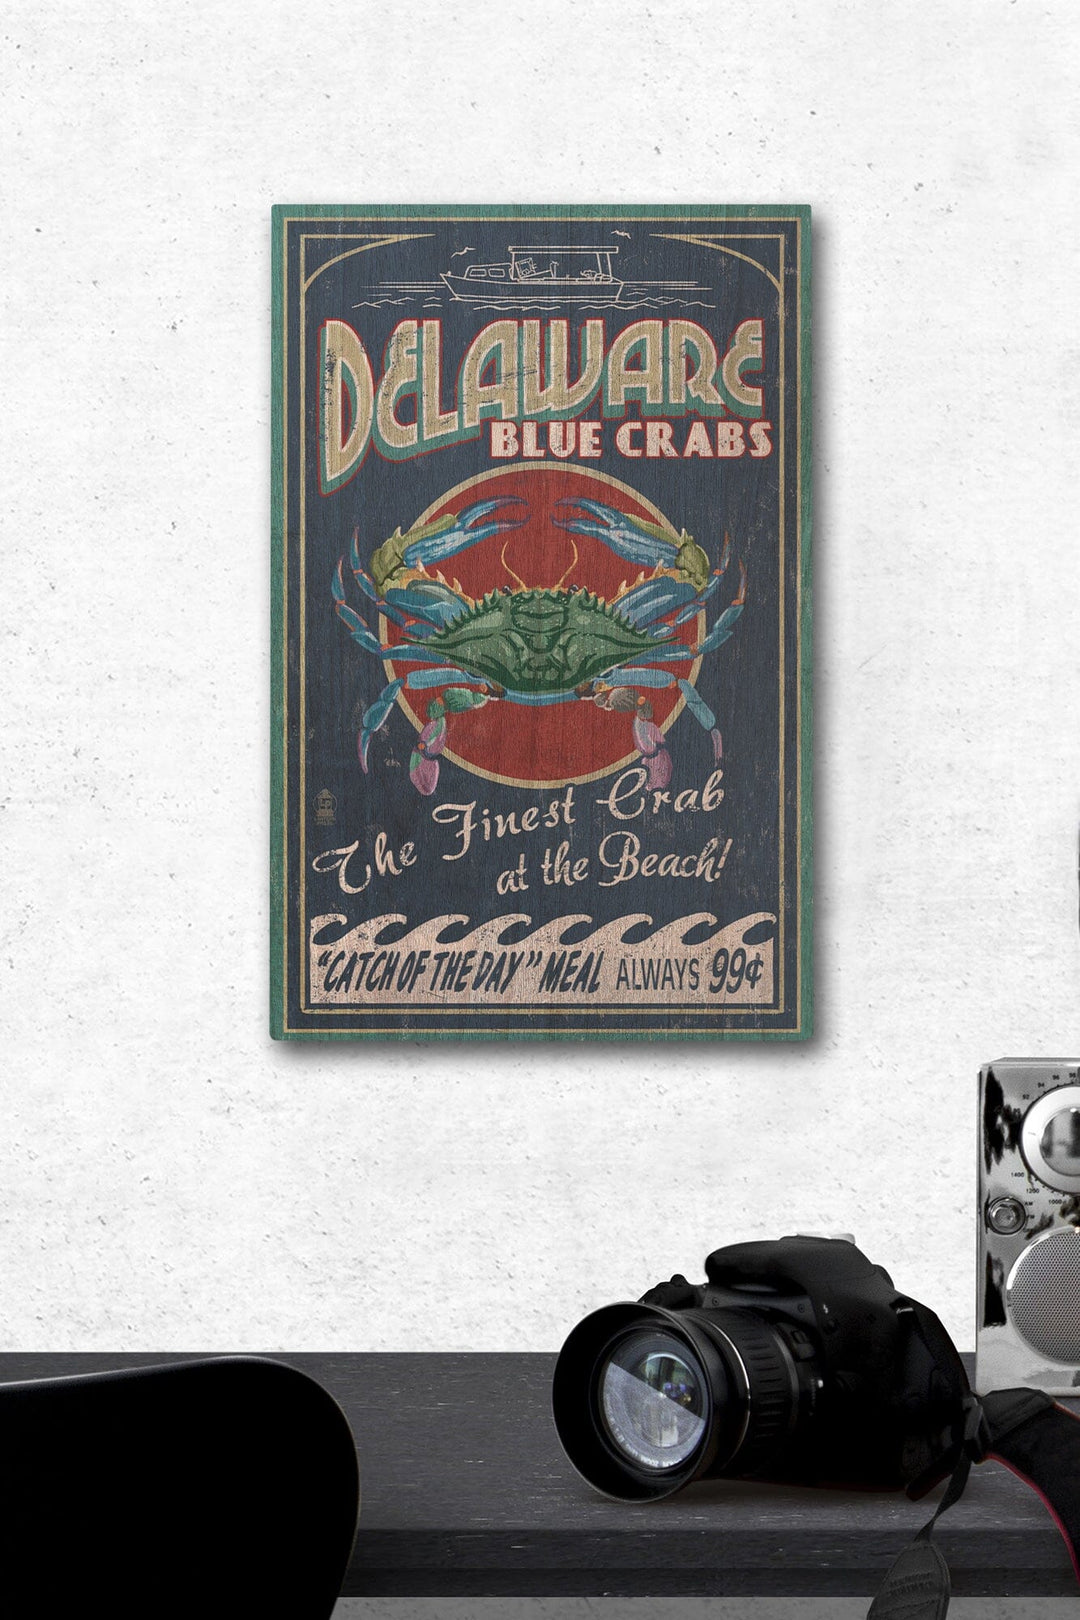 Delaware Blue Crabs Vintage Sign, Best at the Beach, Lantern Press Artwork, Wood Signs and Postcards Wood Lantern Press 12 x 18 Wood Gallery Print 